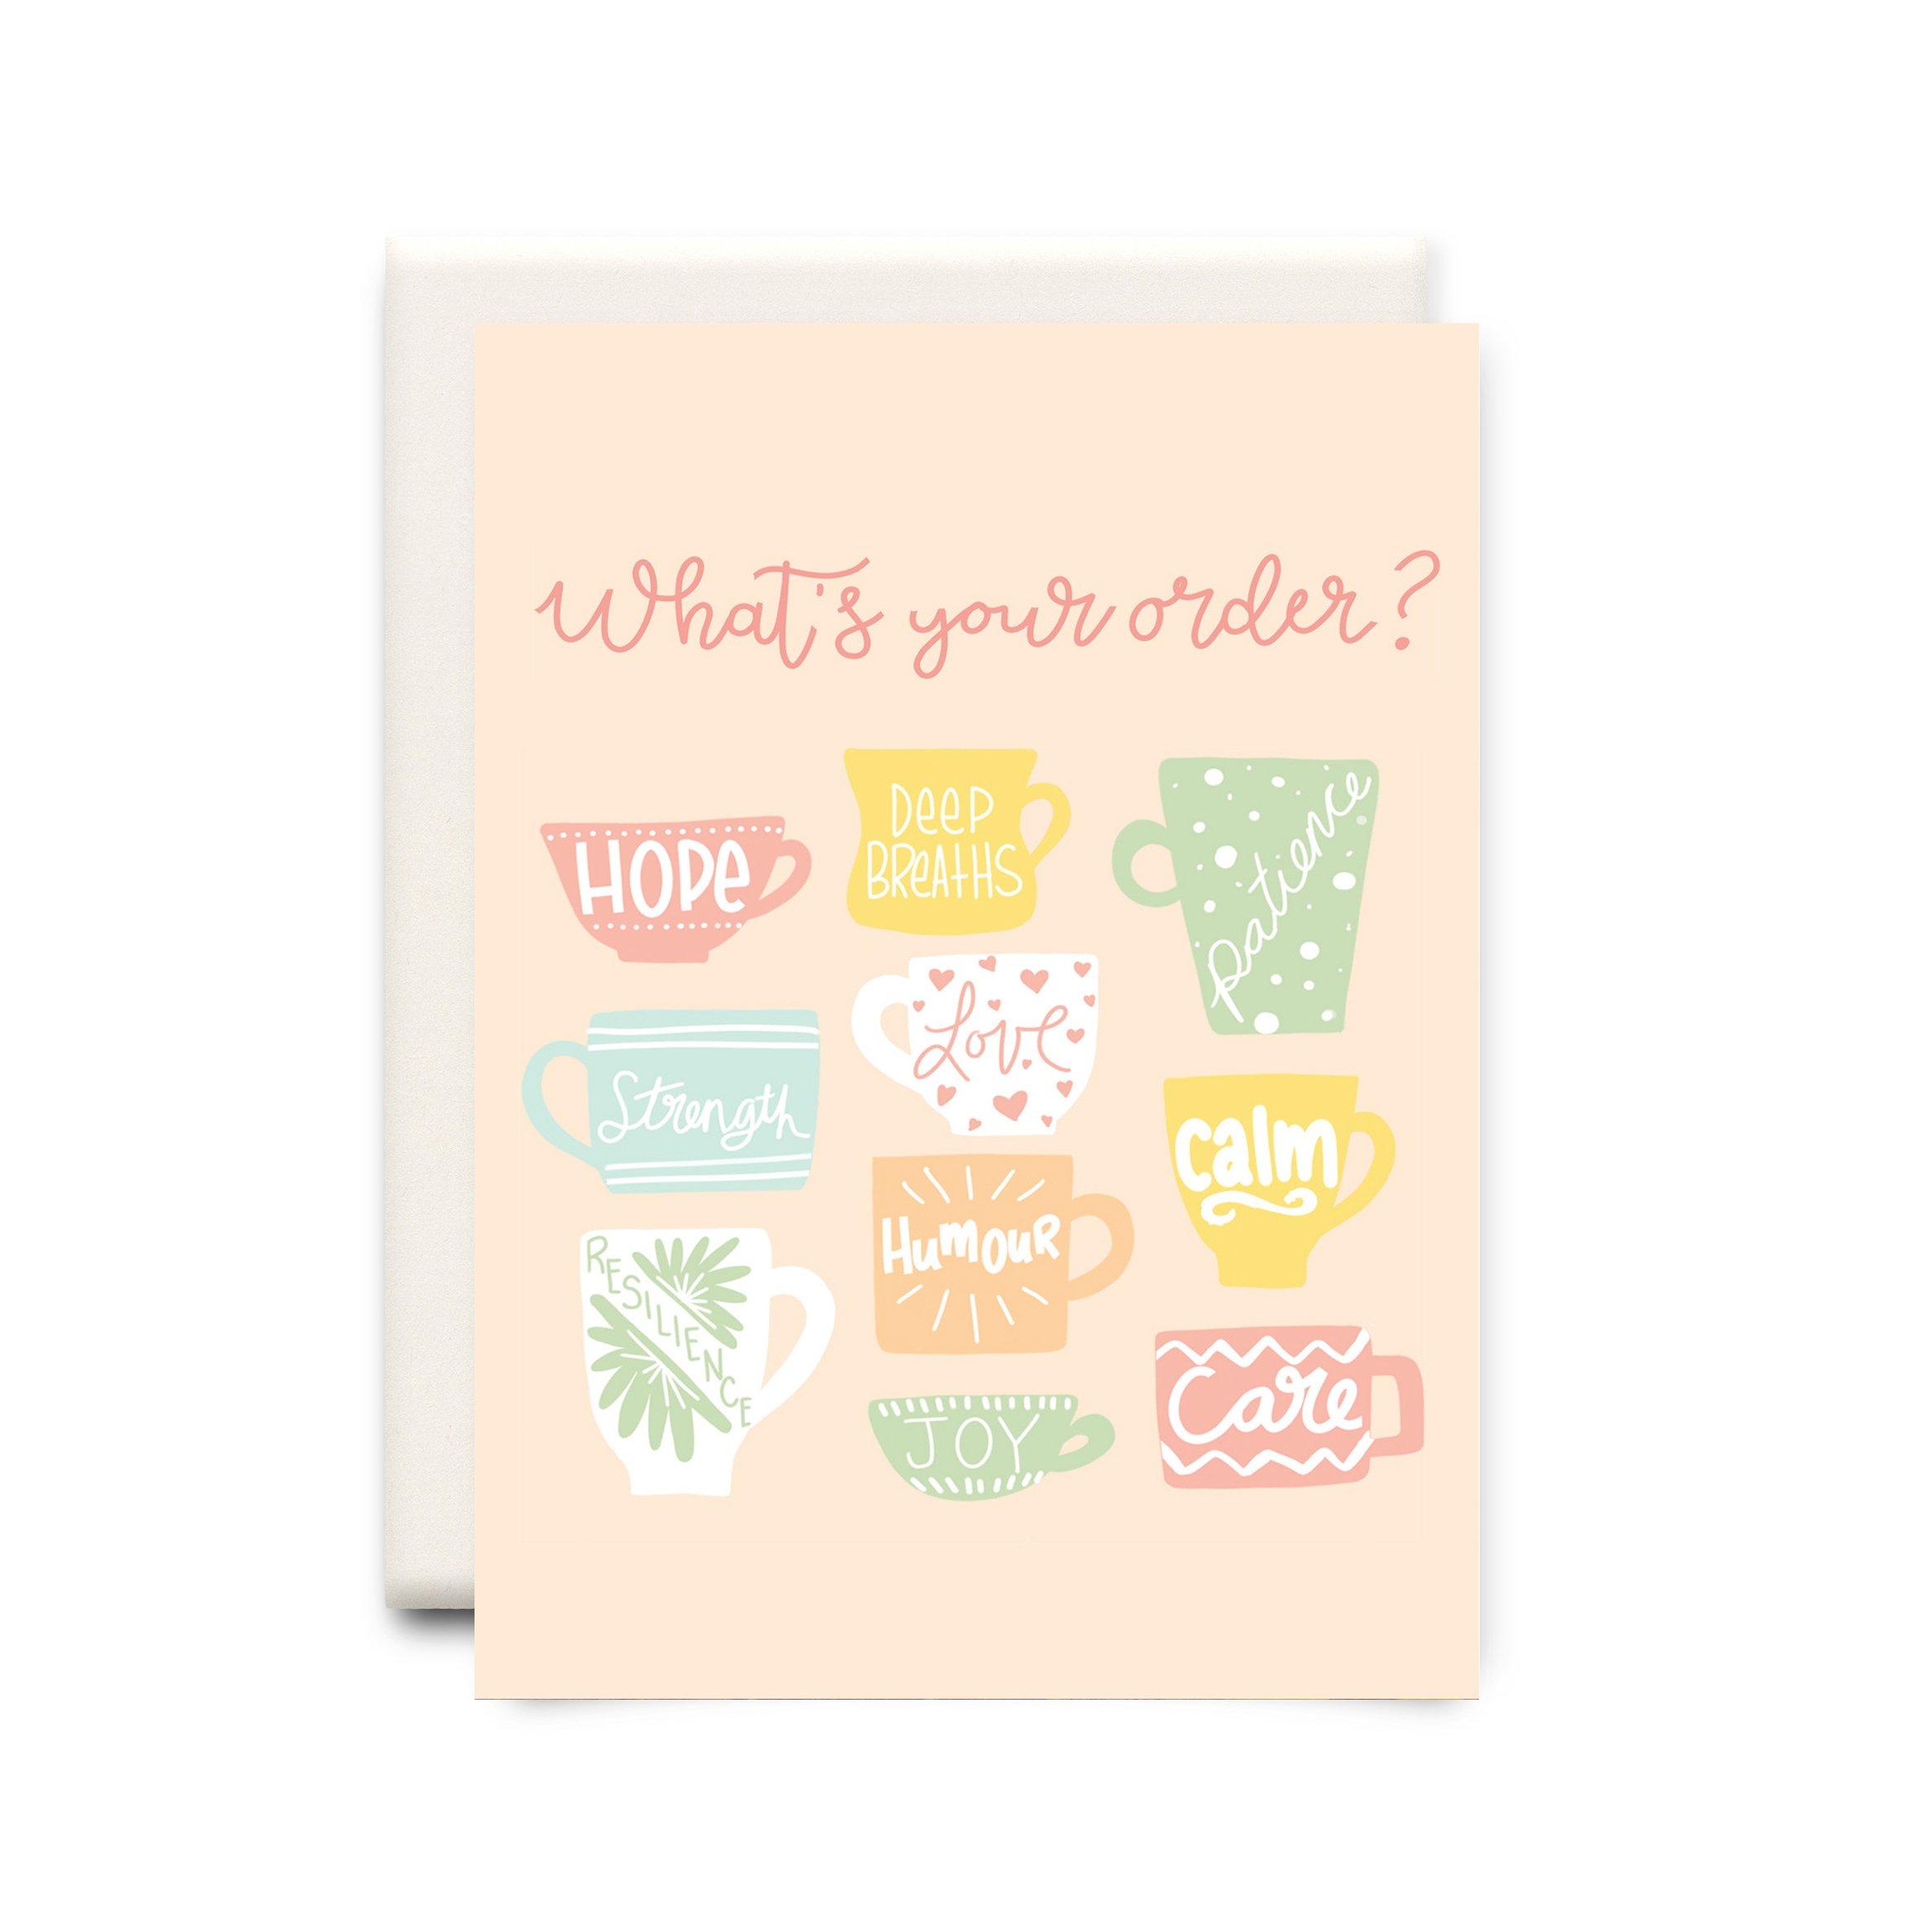 What's Your Order? Friendship Greeting Card.jpeg